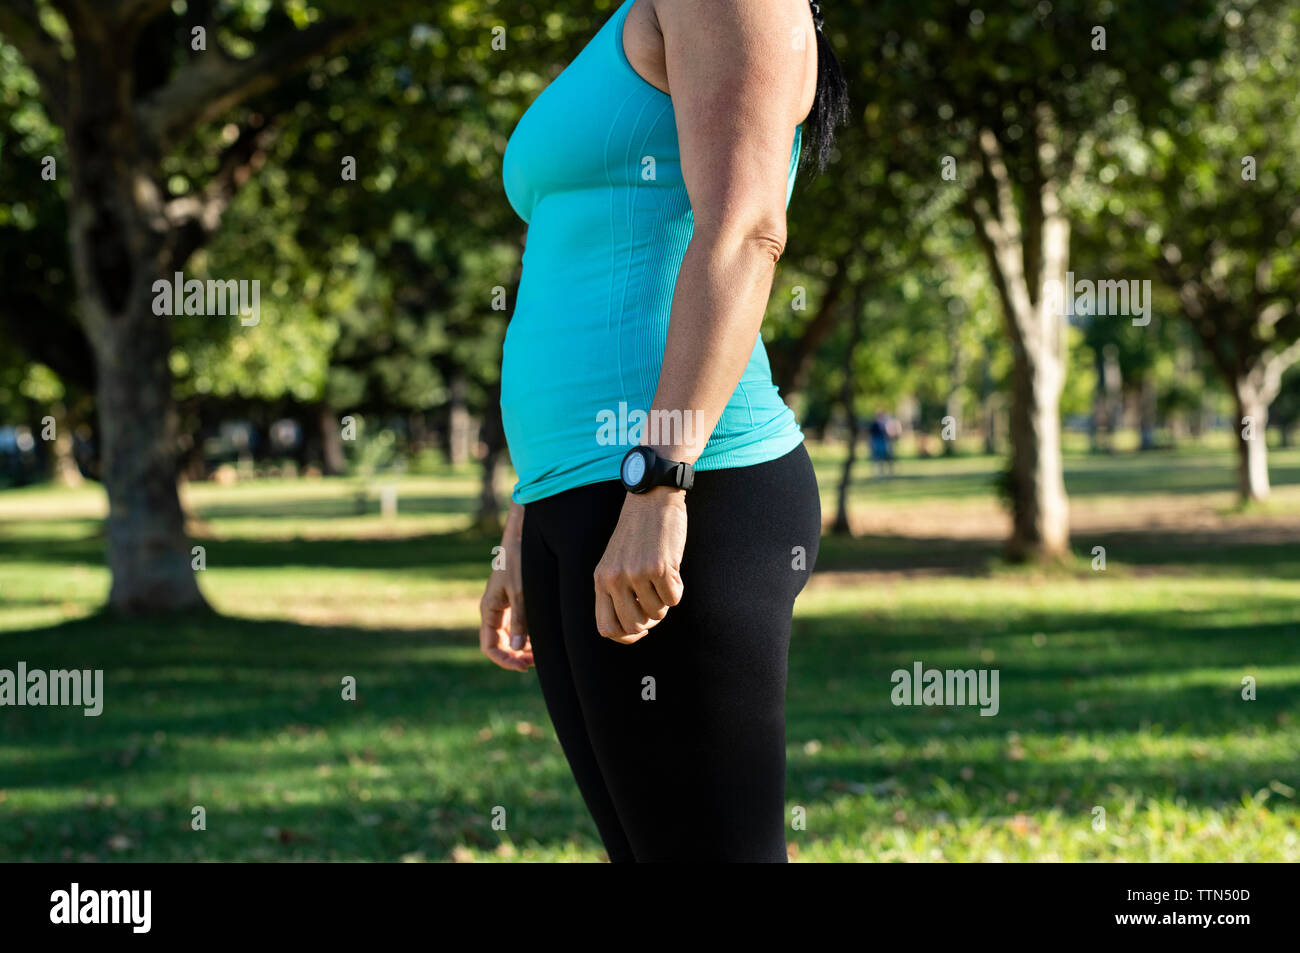 Midsection of woman in sports clothing standing against trees at park Stock Photo